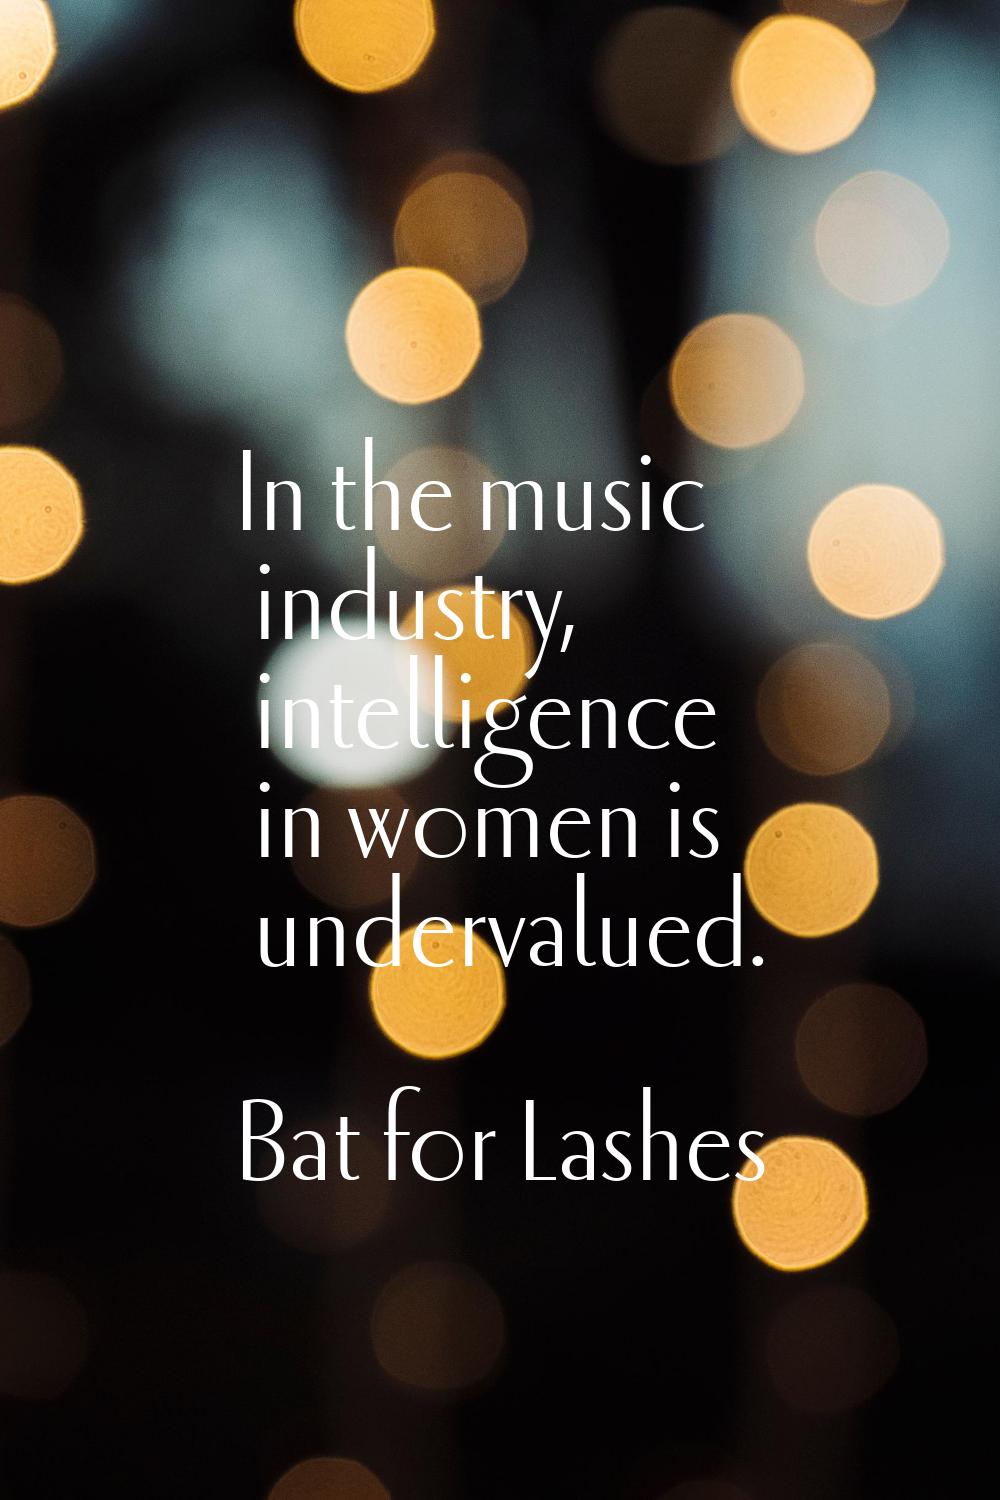 In the music industry, intelligence in women is undervalued.